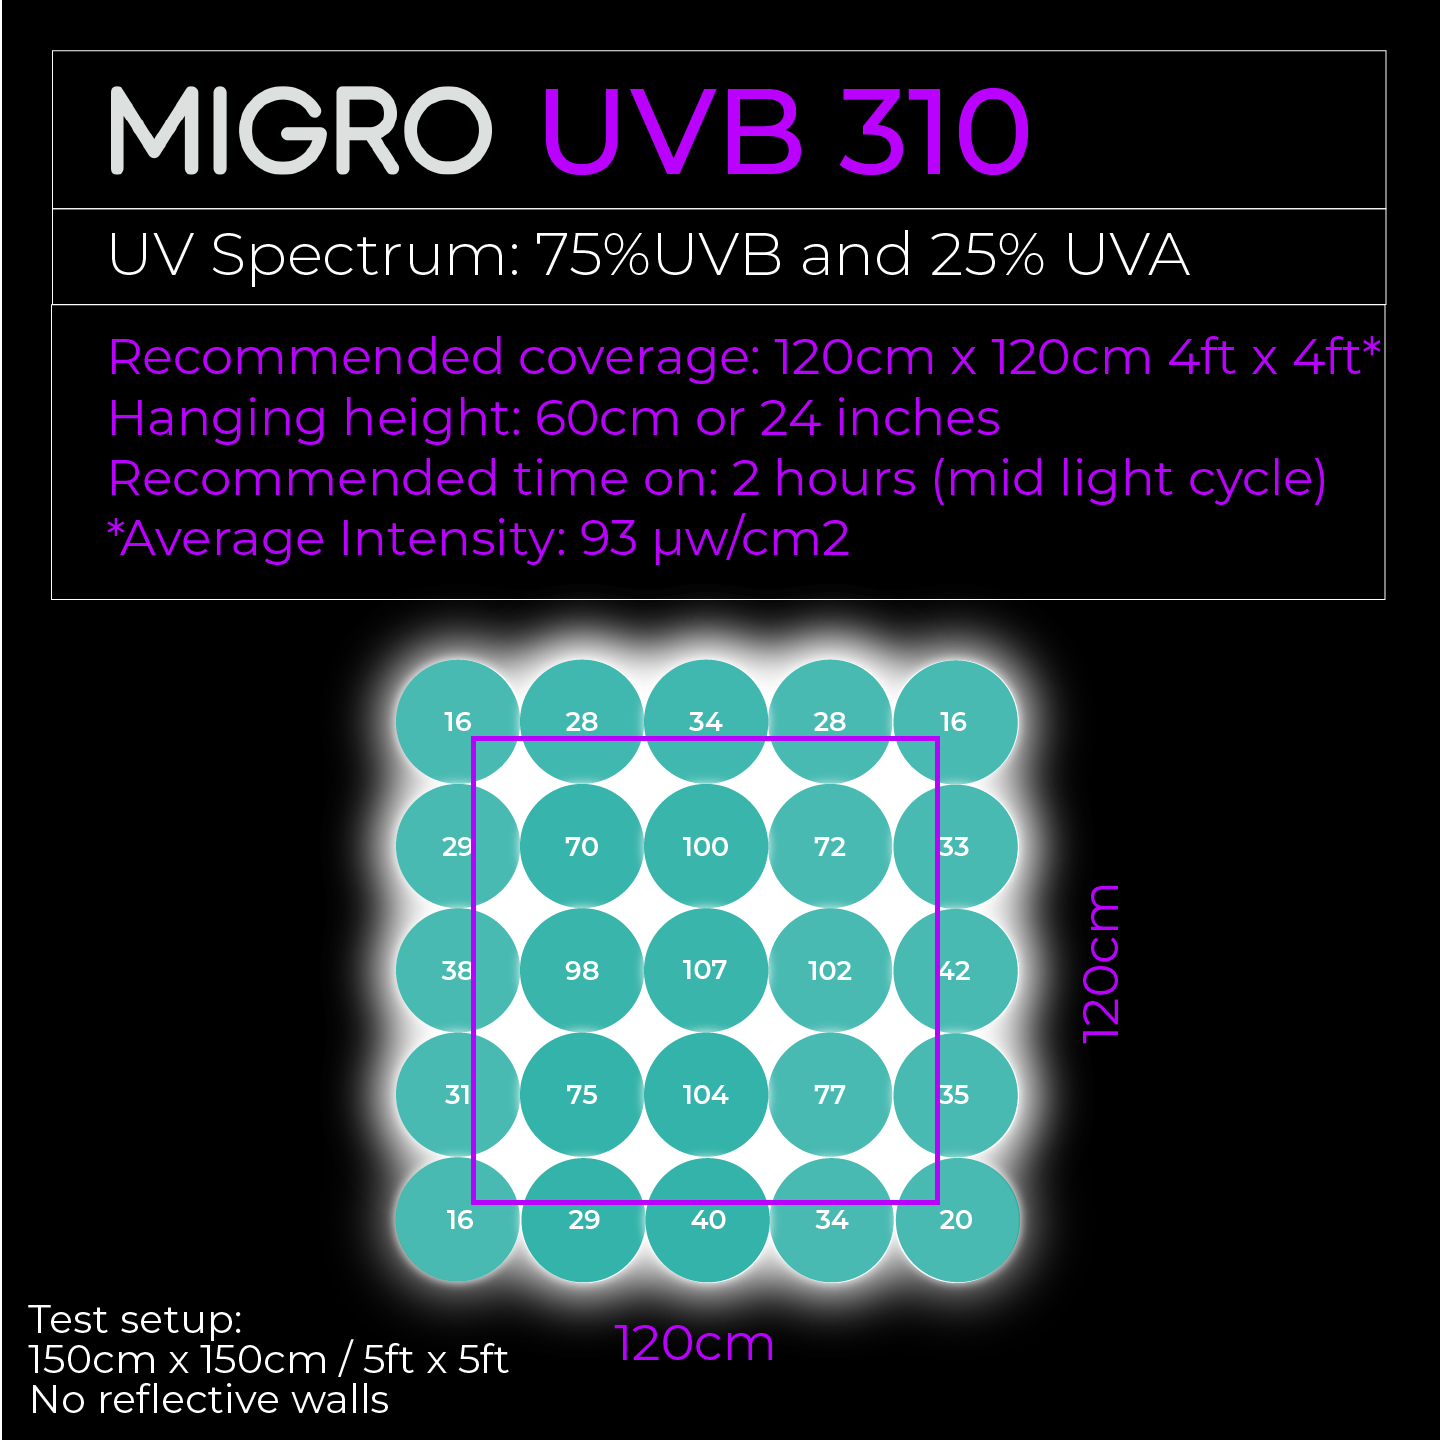 MIGRO UVB 310 lamp and fluorescent tube